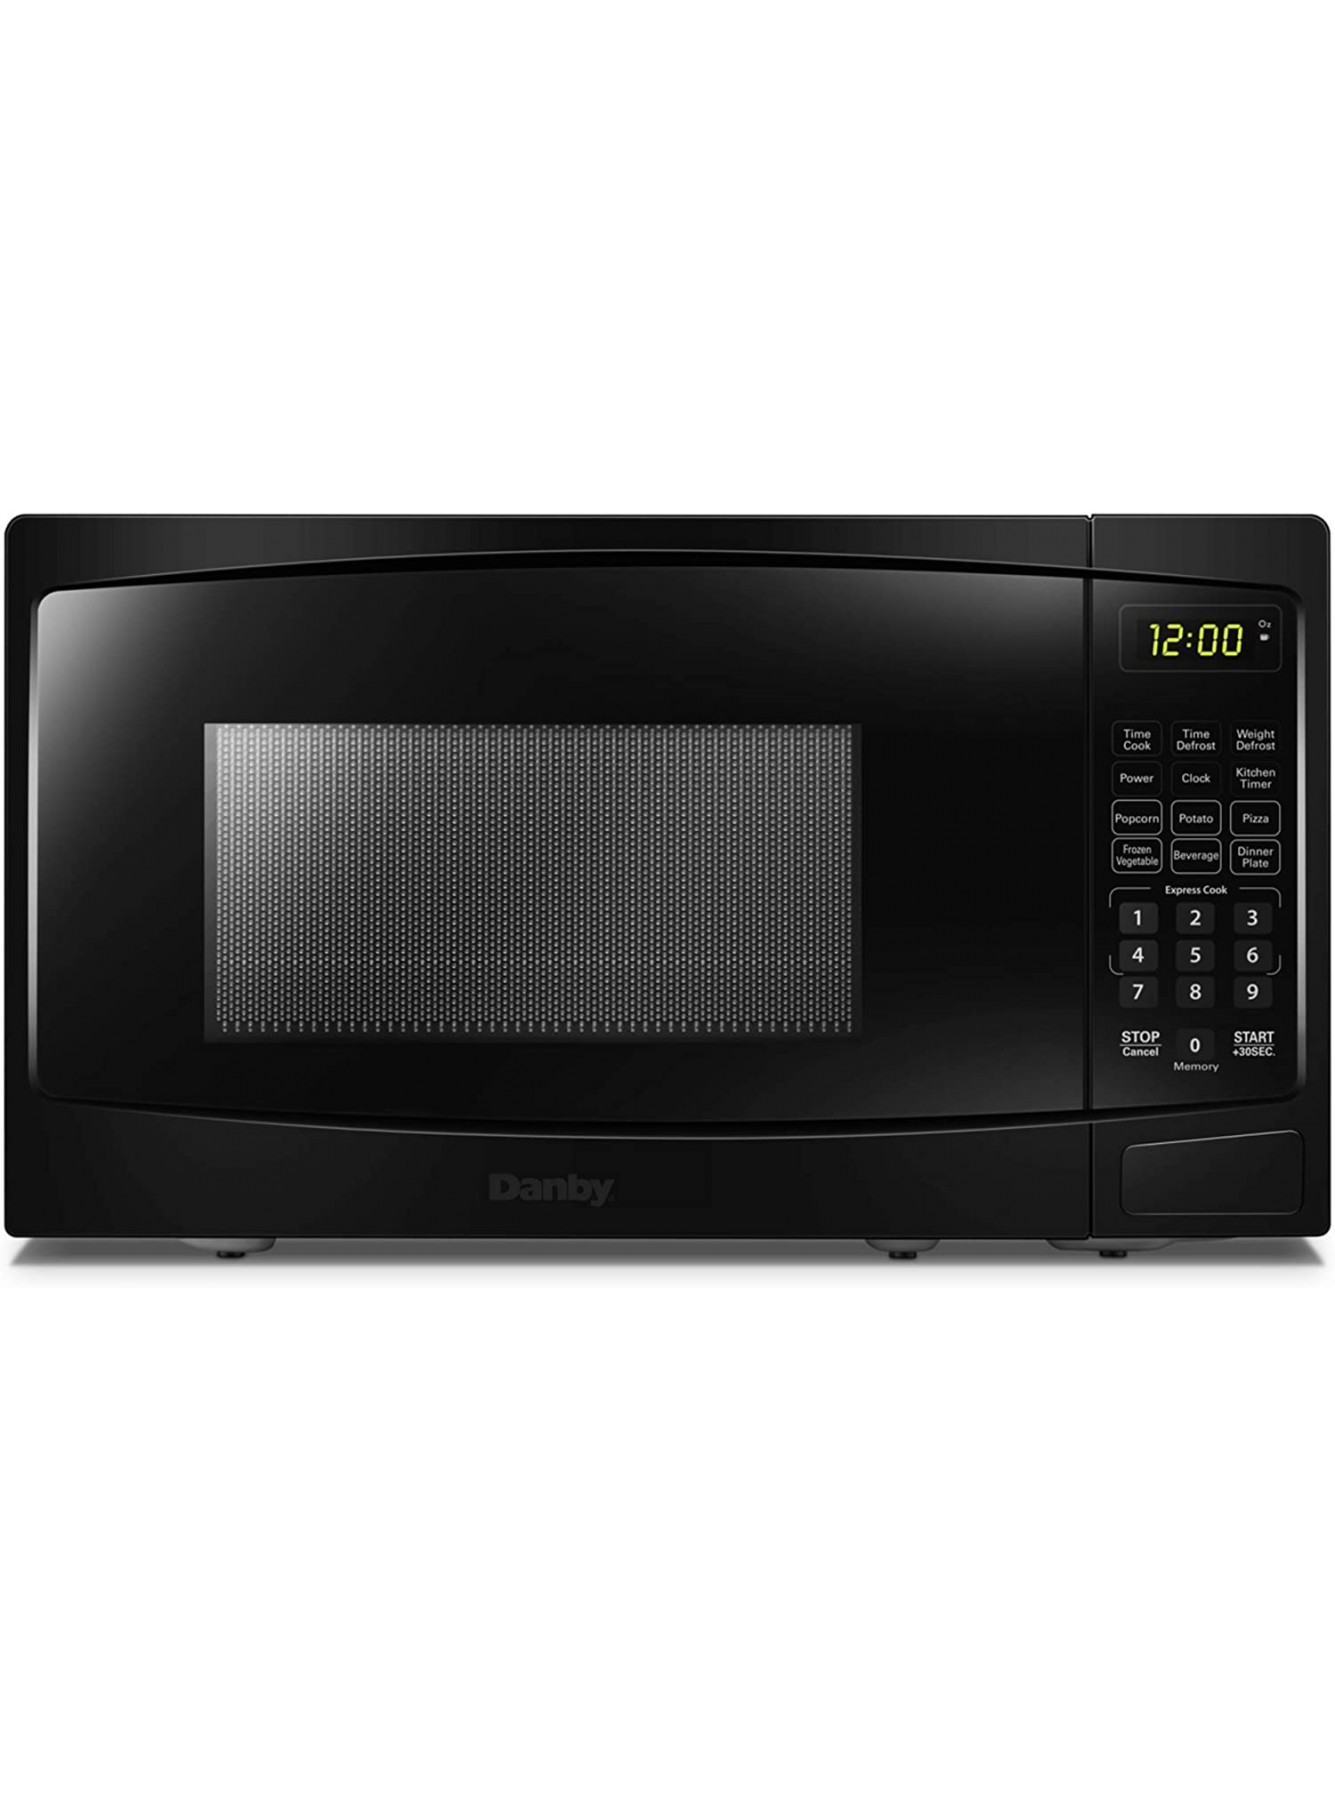 Danby DBMW0720BBB 700 Watts 0.7 Cu.Ft. Countertop Microwave with Push Button Door| 10 Power Levels 6 Cooking Programs| Auto Defrost and Child Lock Black B085565721